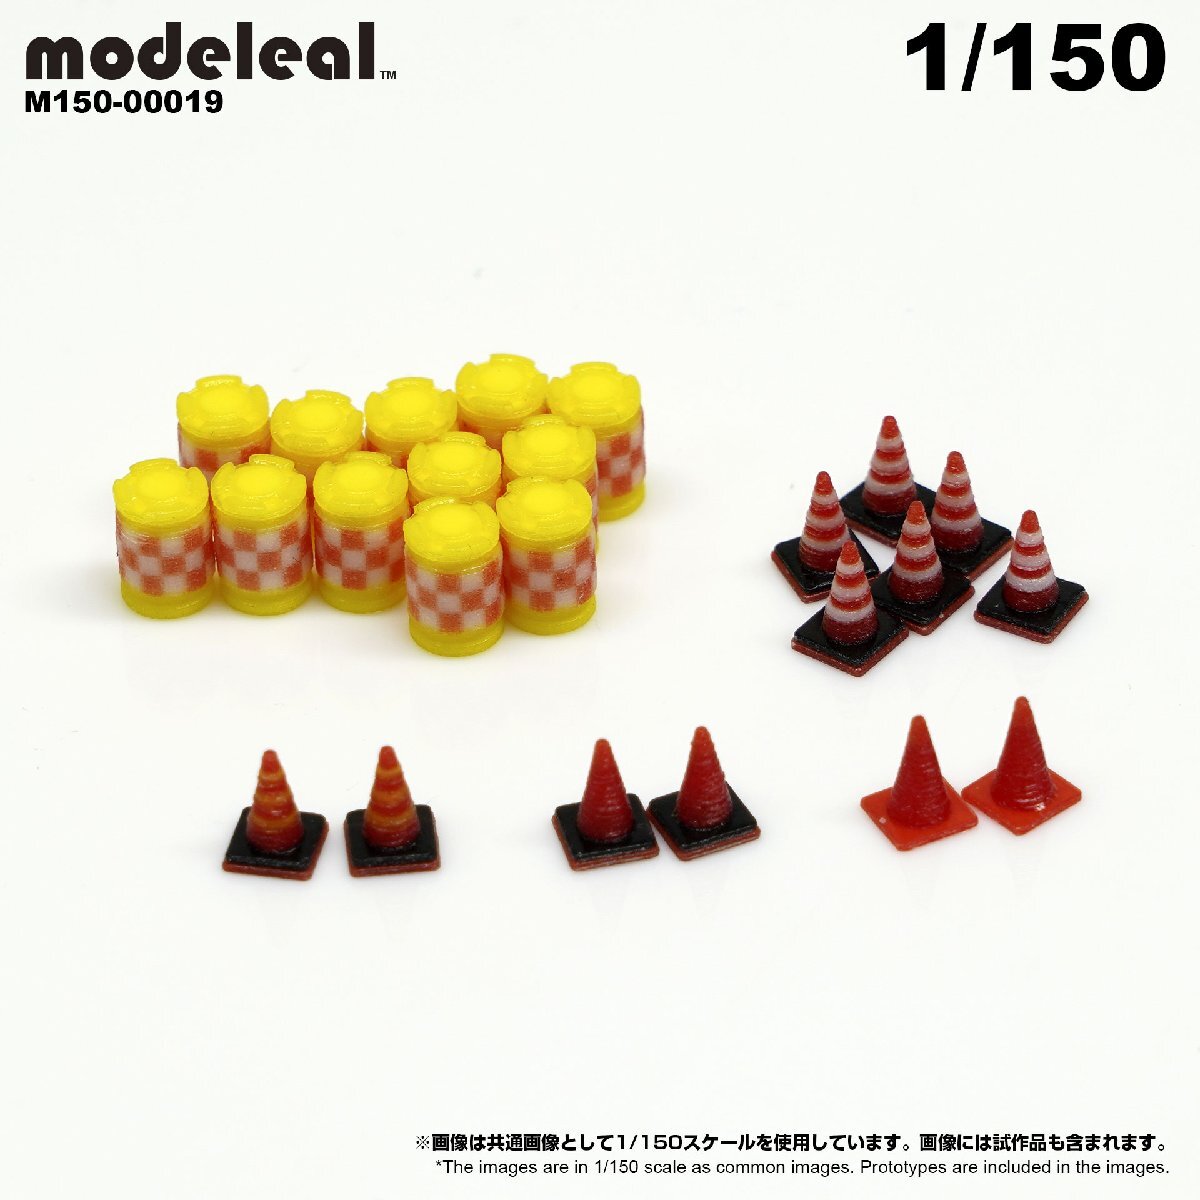 M150-00019 modeleal 1/150. on accessory A coloring settled figure color cone cushion drum 